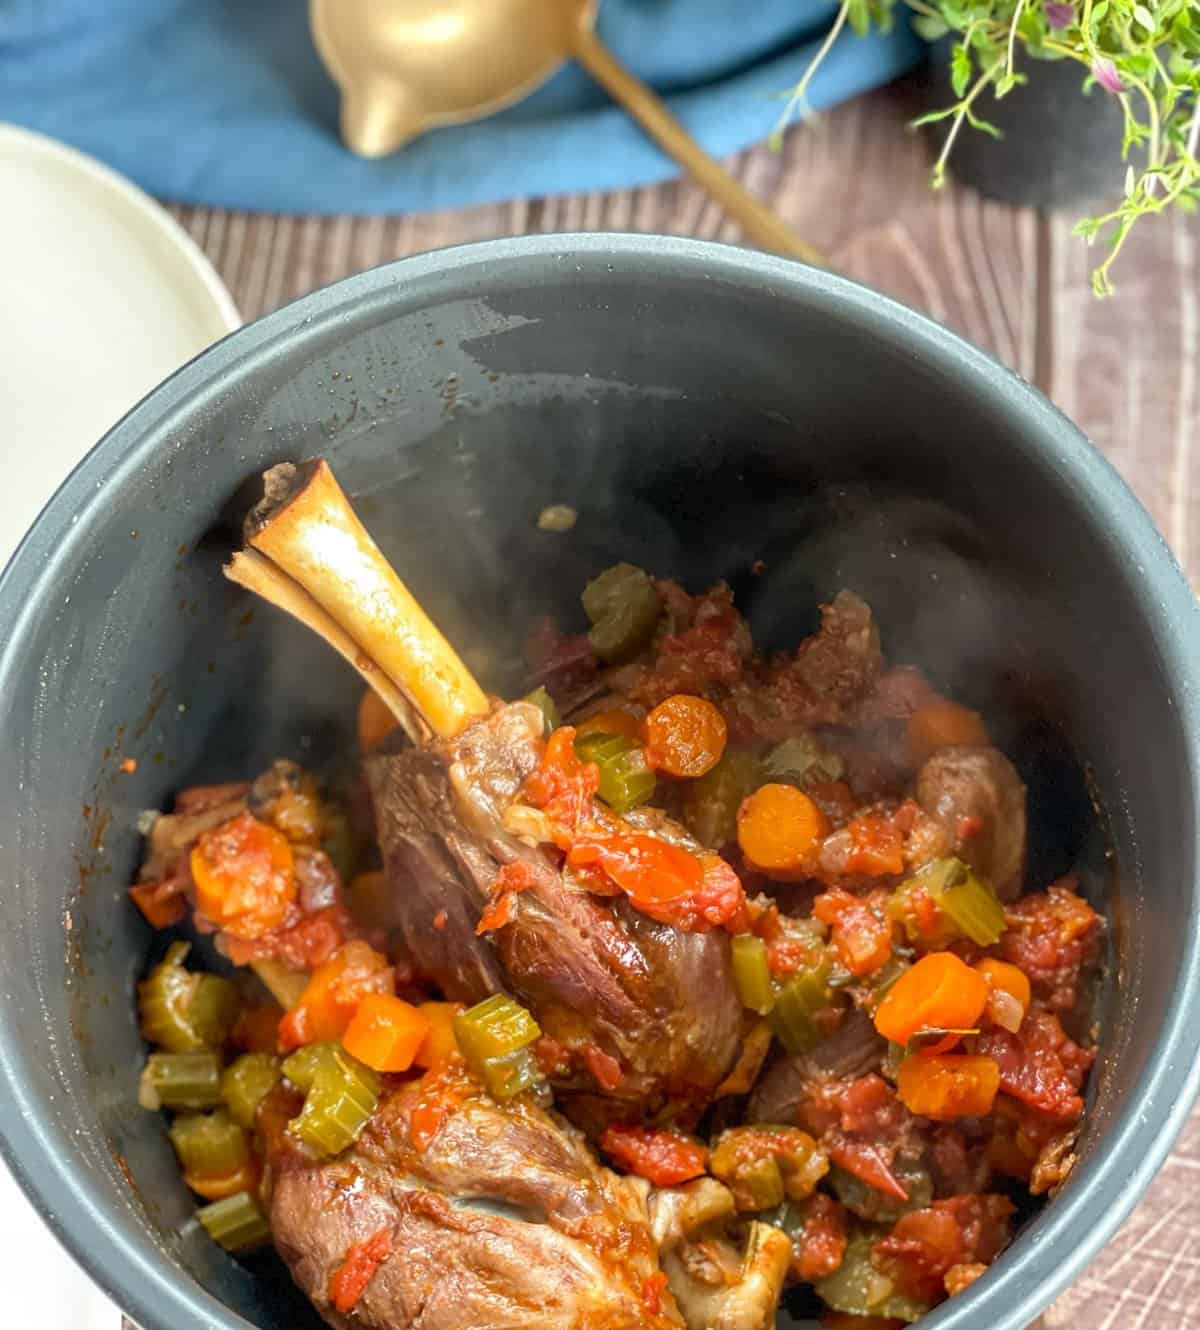 Tender lamb shanks, meat is falling off the bone in the slow cooker, separated from the cooking liquids